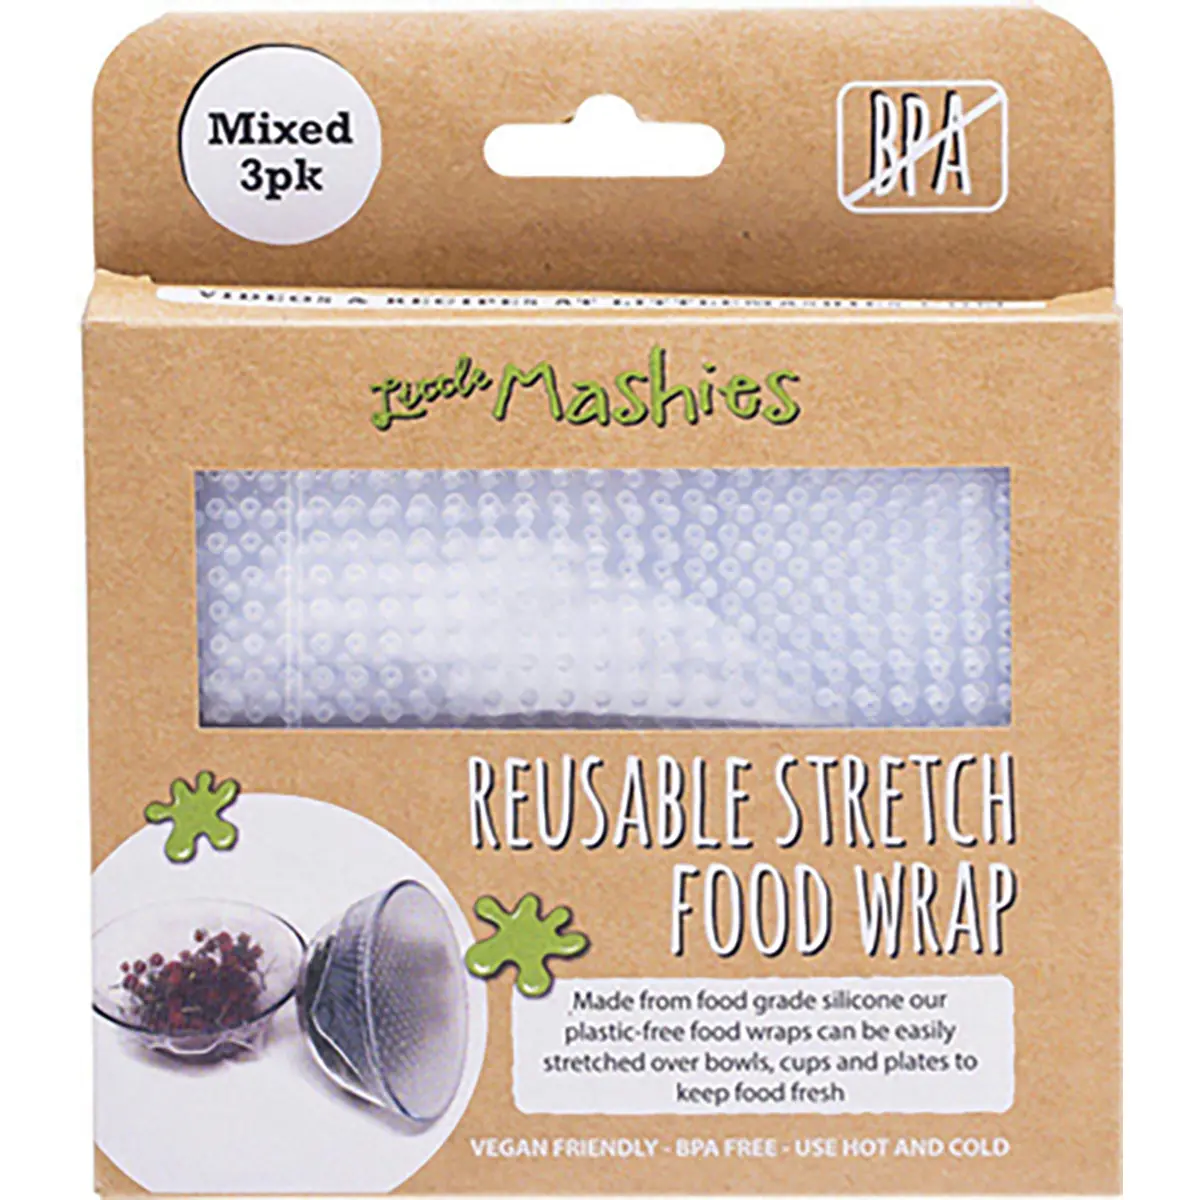 Little-Mashies-Reusable-Stretch-Food-Wrap-Mixed